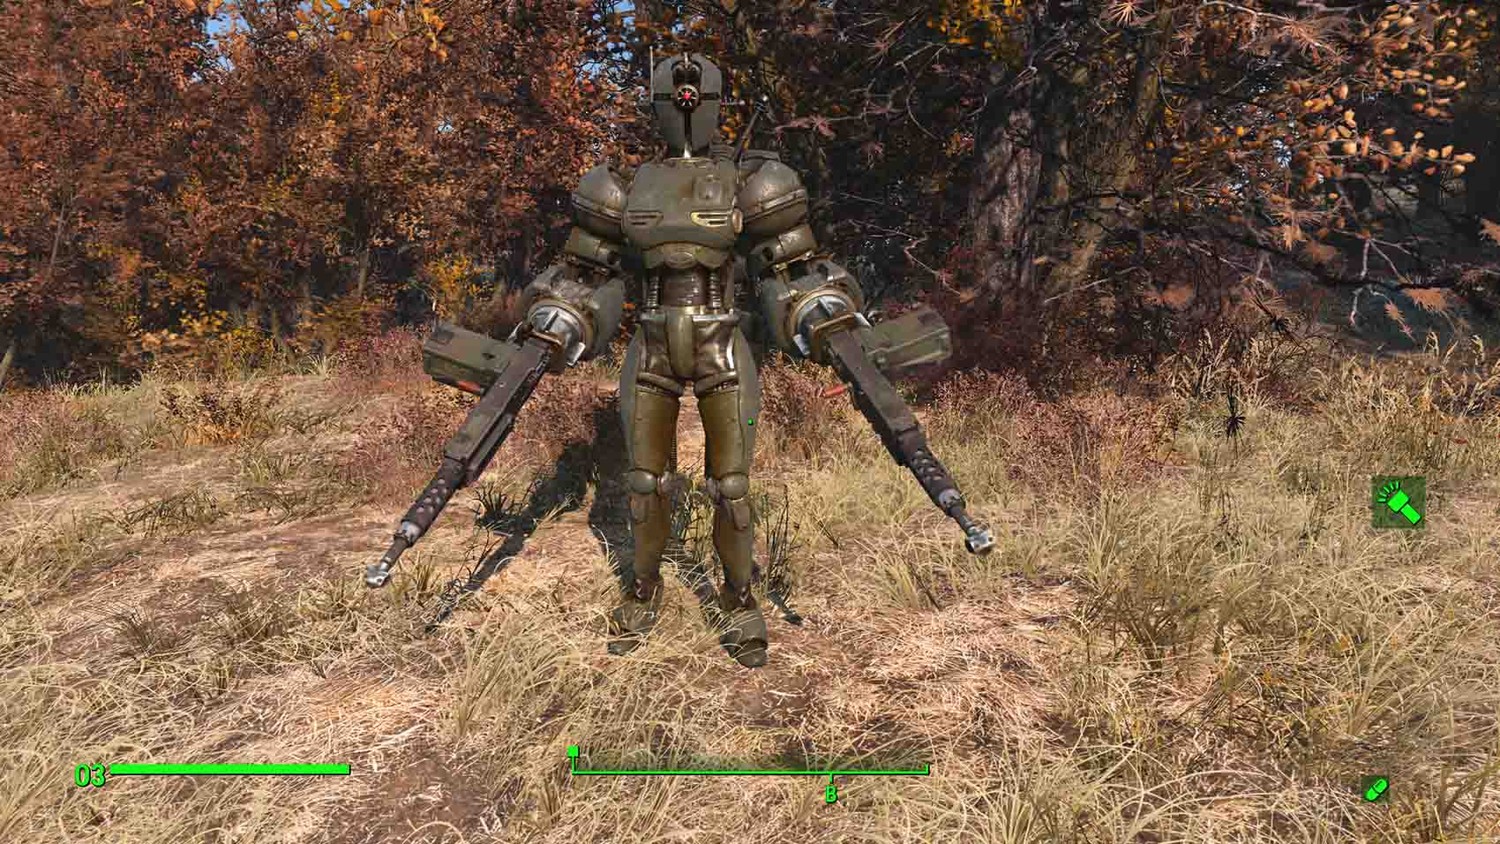 Holstered weapon fallout 4 фото 98